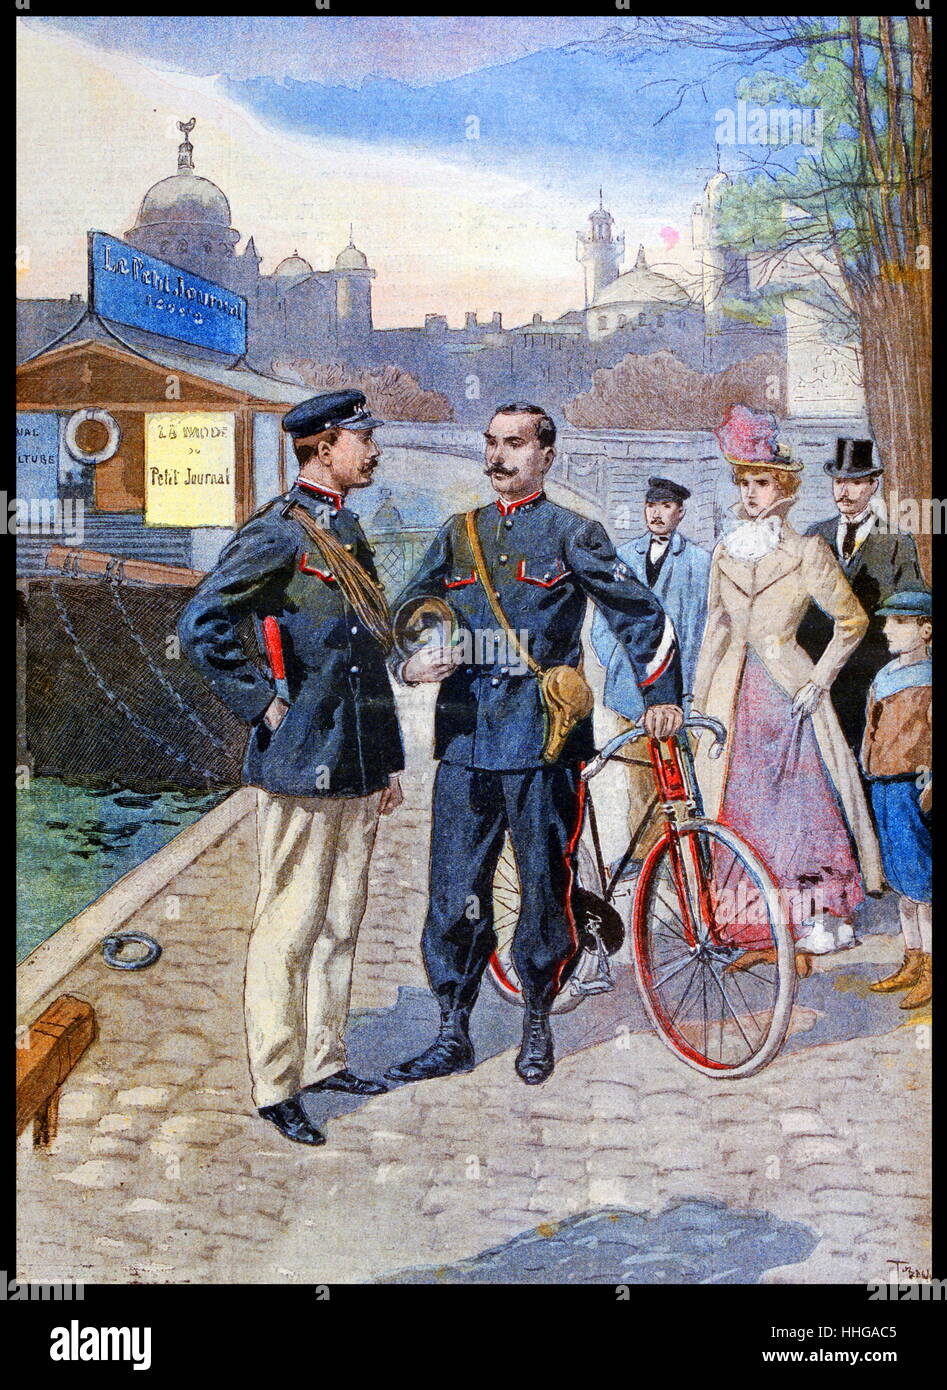 Illustration showing the French river police and mounted bicycle policeman at the time of the Exposition Universelle of 1900. This was a fair held in Paris, France, from 14 April to 12 November 1900, to celebrate the achievements of the past century and to accelerate development into the next. Stock Photo